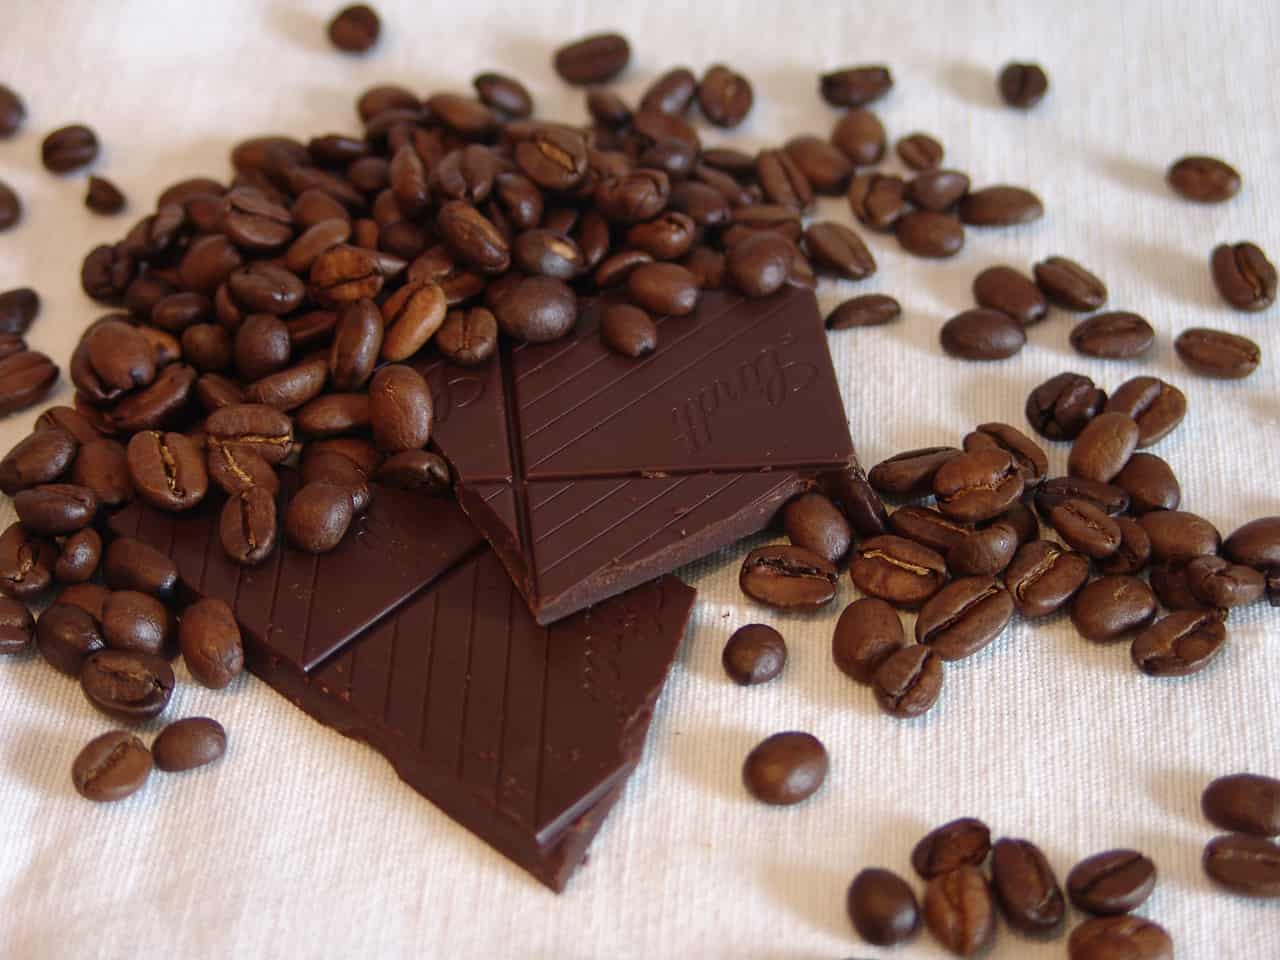 How to Make Chocolate-Covered Coffee Beans (Recipe & Tips)